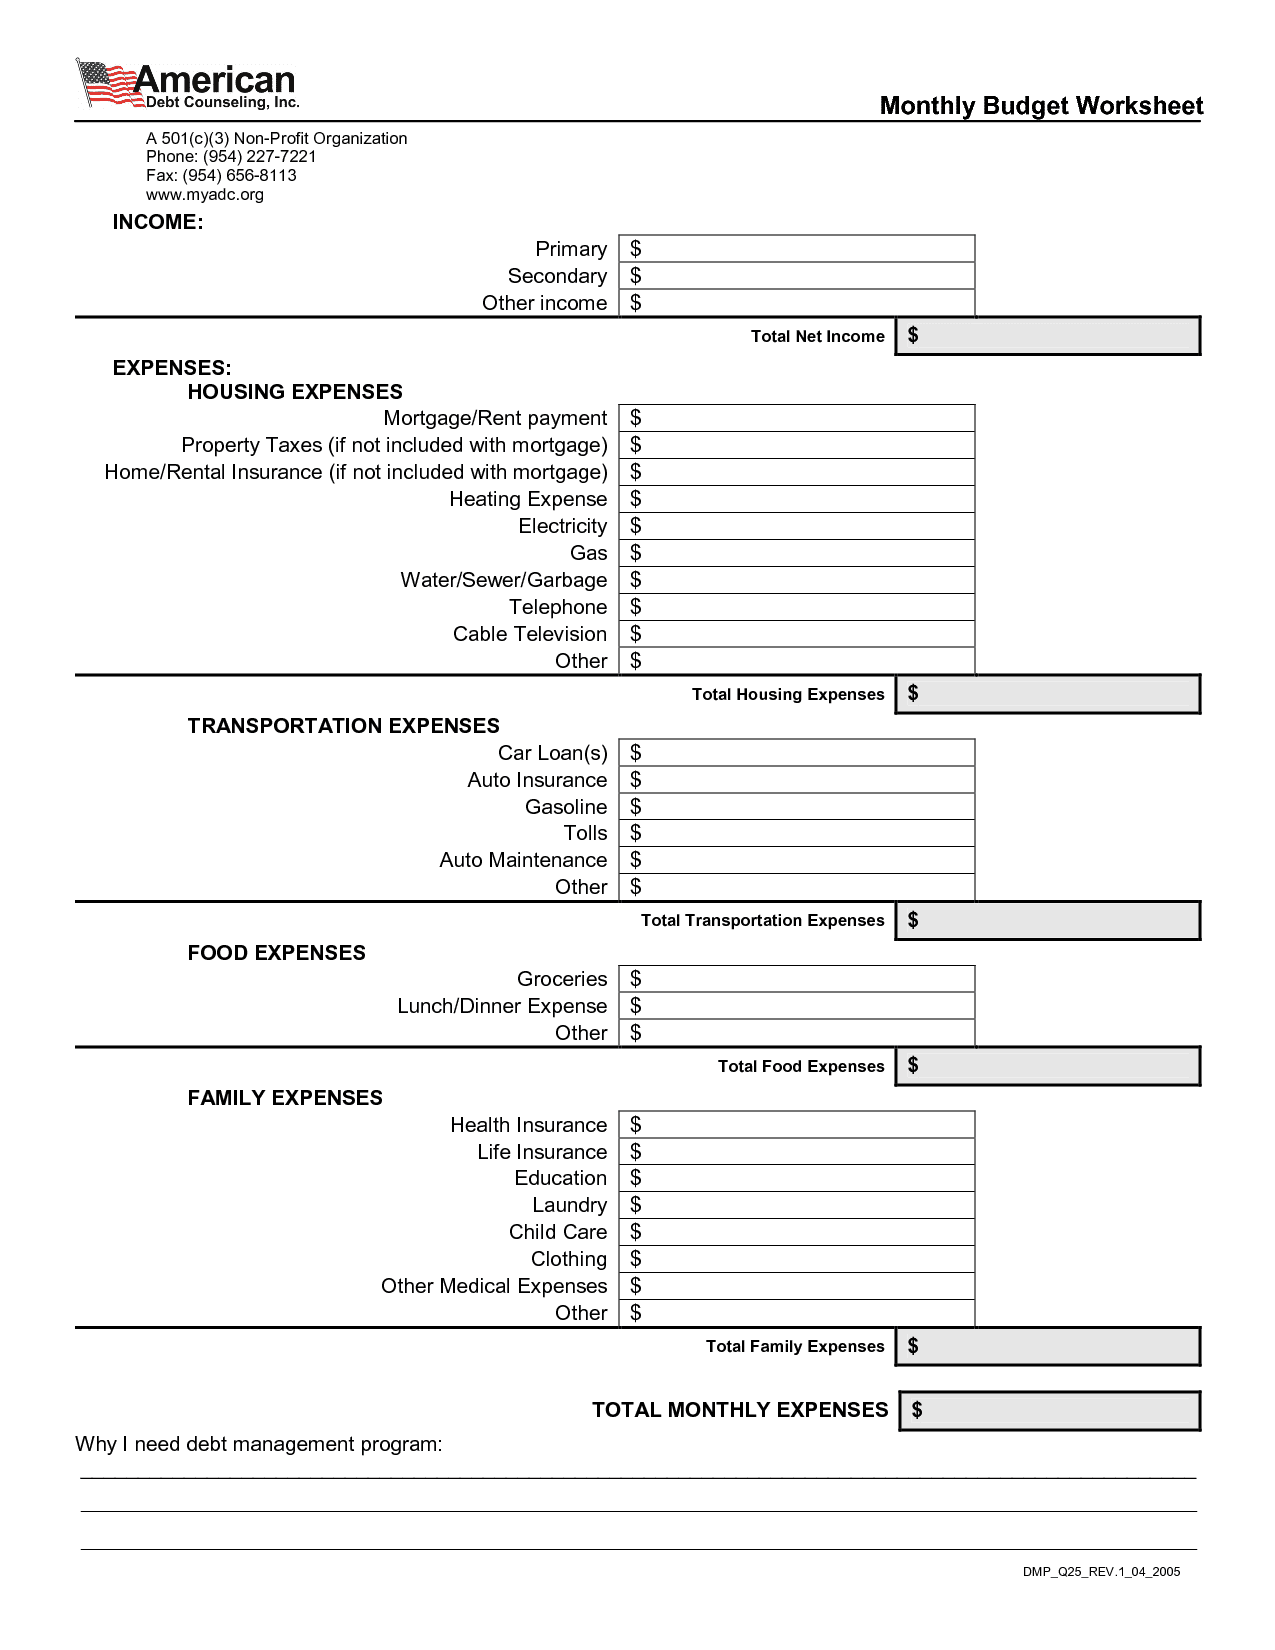 Funeral Budget Sheet And Plan Your Own Funeral Worksheets